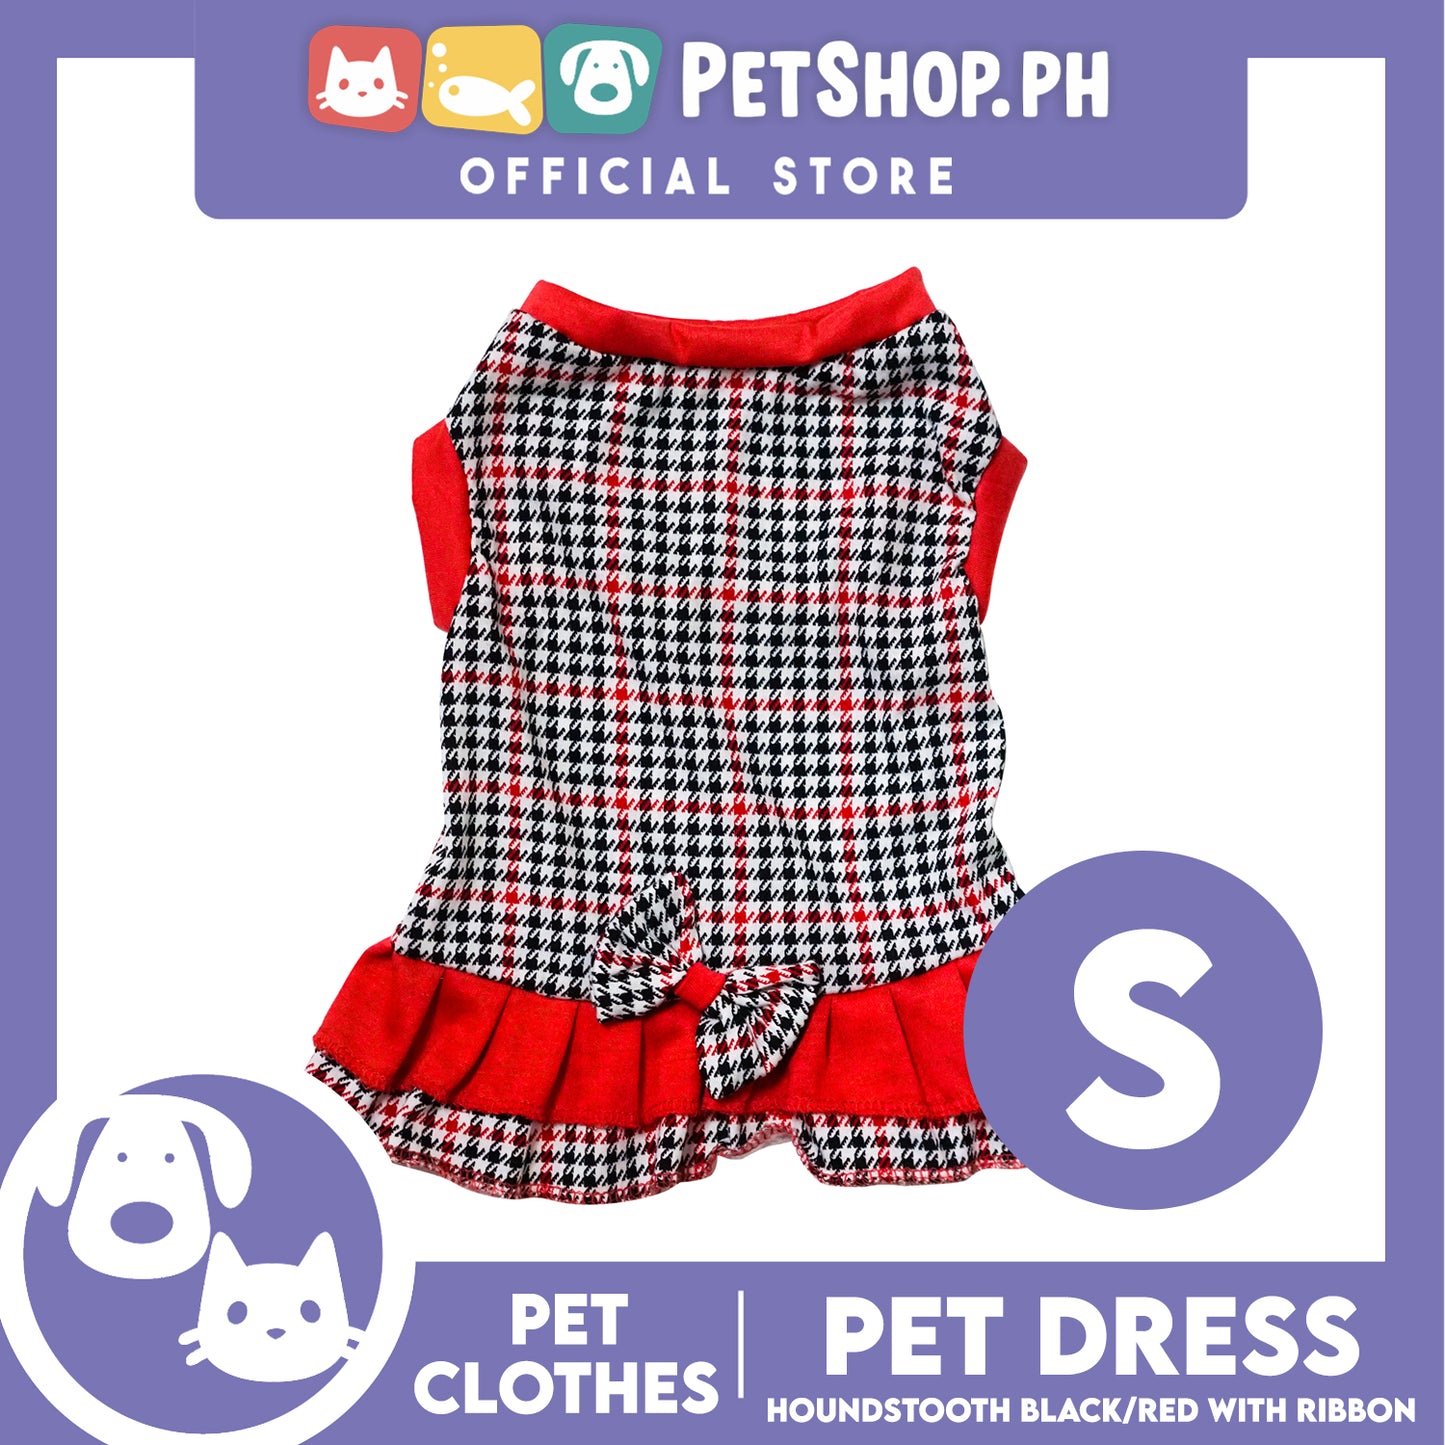 Pet Dress Houndstooth Black/Red with ribbon (Small) Pet Dress Clothes Perfect for Dogs